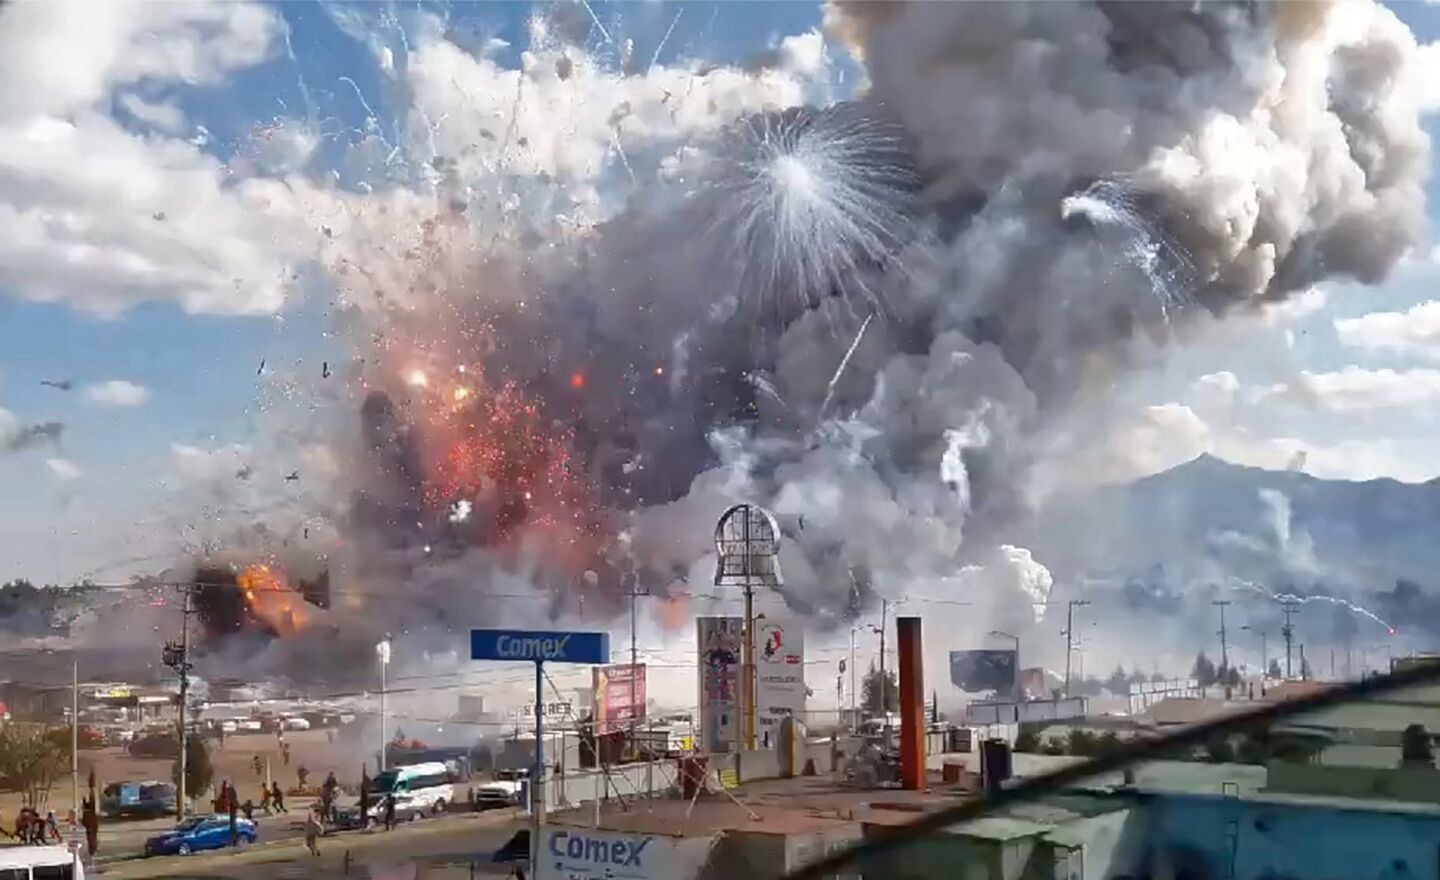 A massive explosion guts Mexico's biggest fireworks market in Tultepec, Mexico.